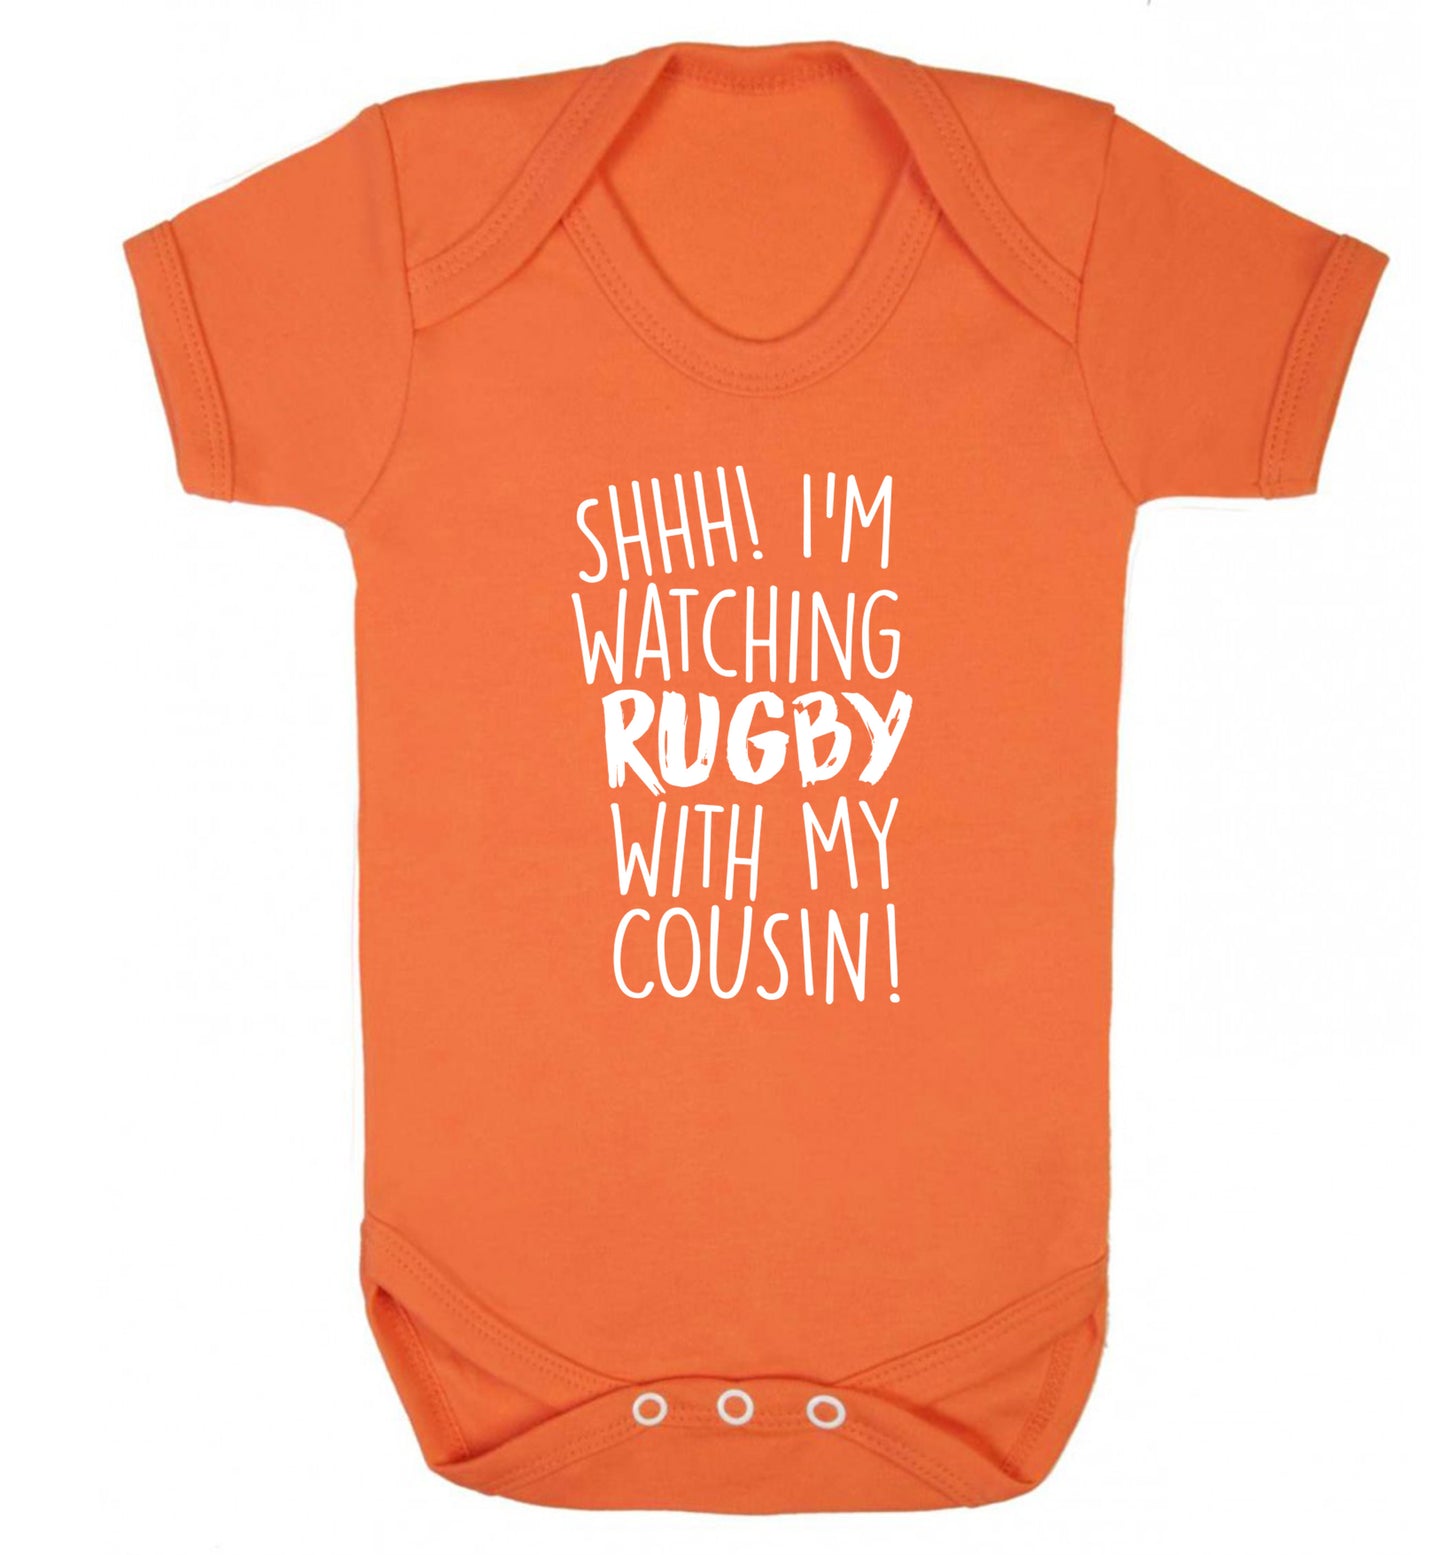 Shhh I'm watching rugby with my cousin Baby Vest orange 18-24 months